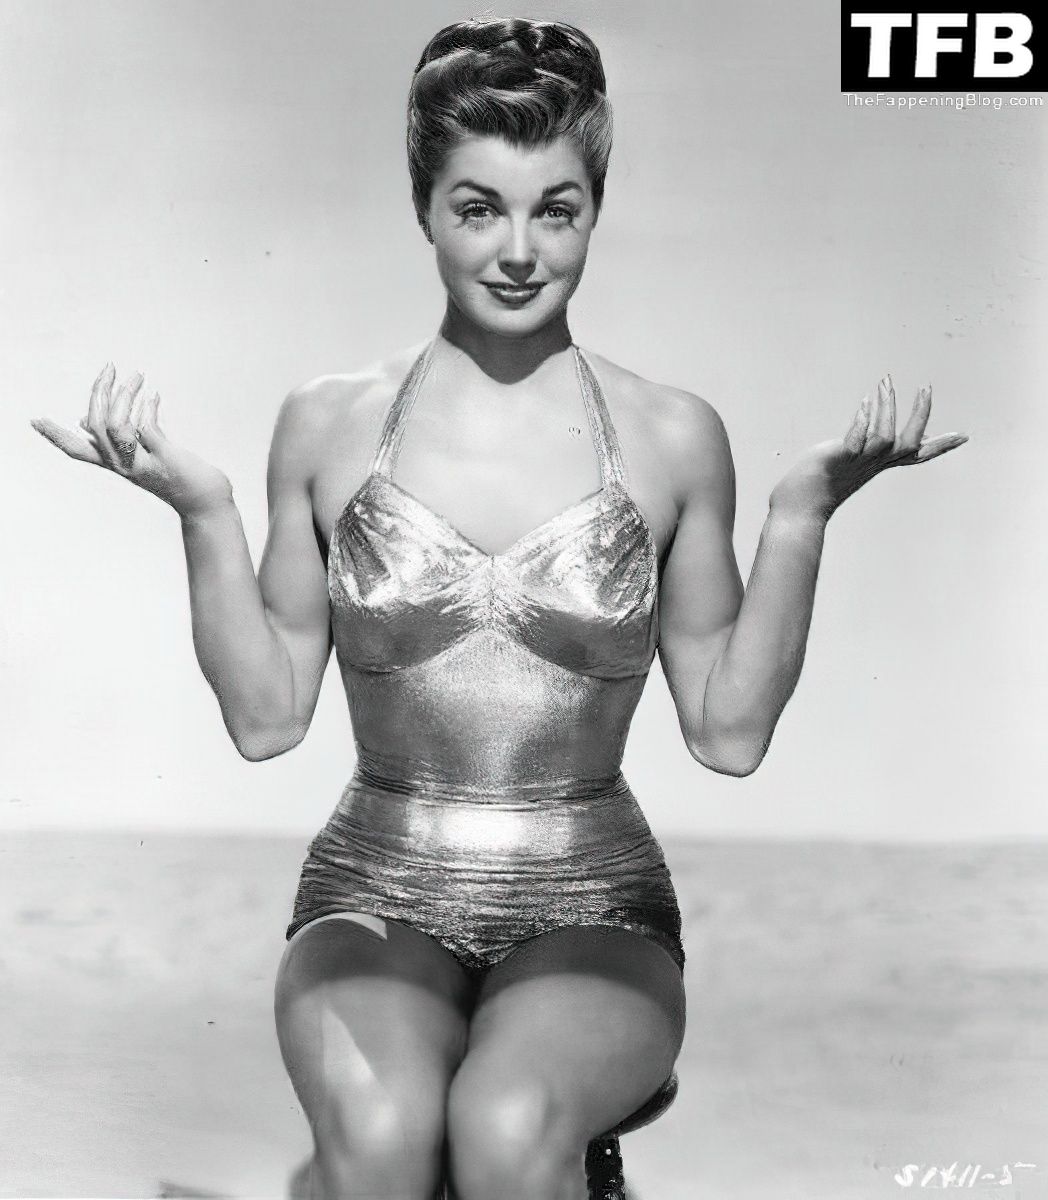 Esther-Williams-The-Fappening-Blog-3.jpg